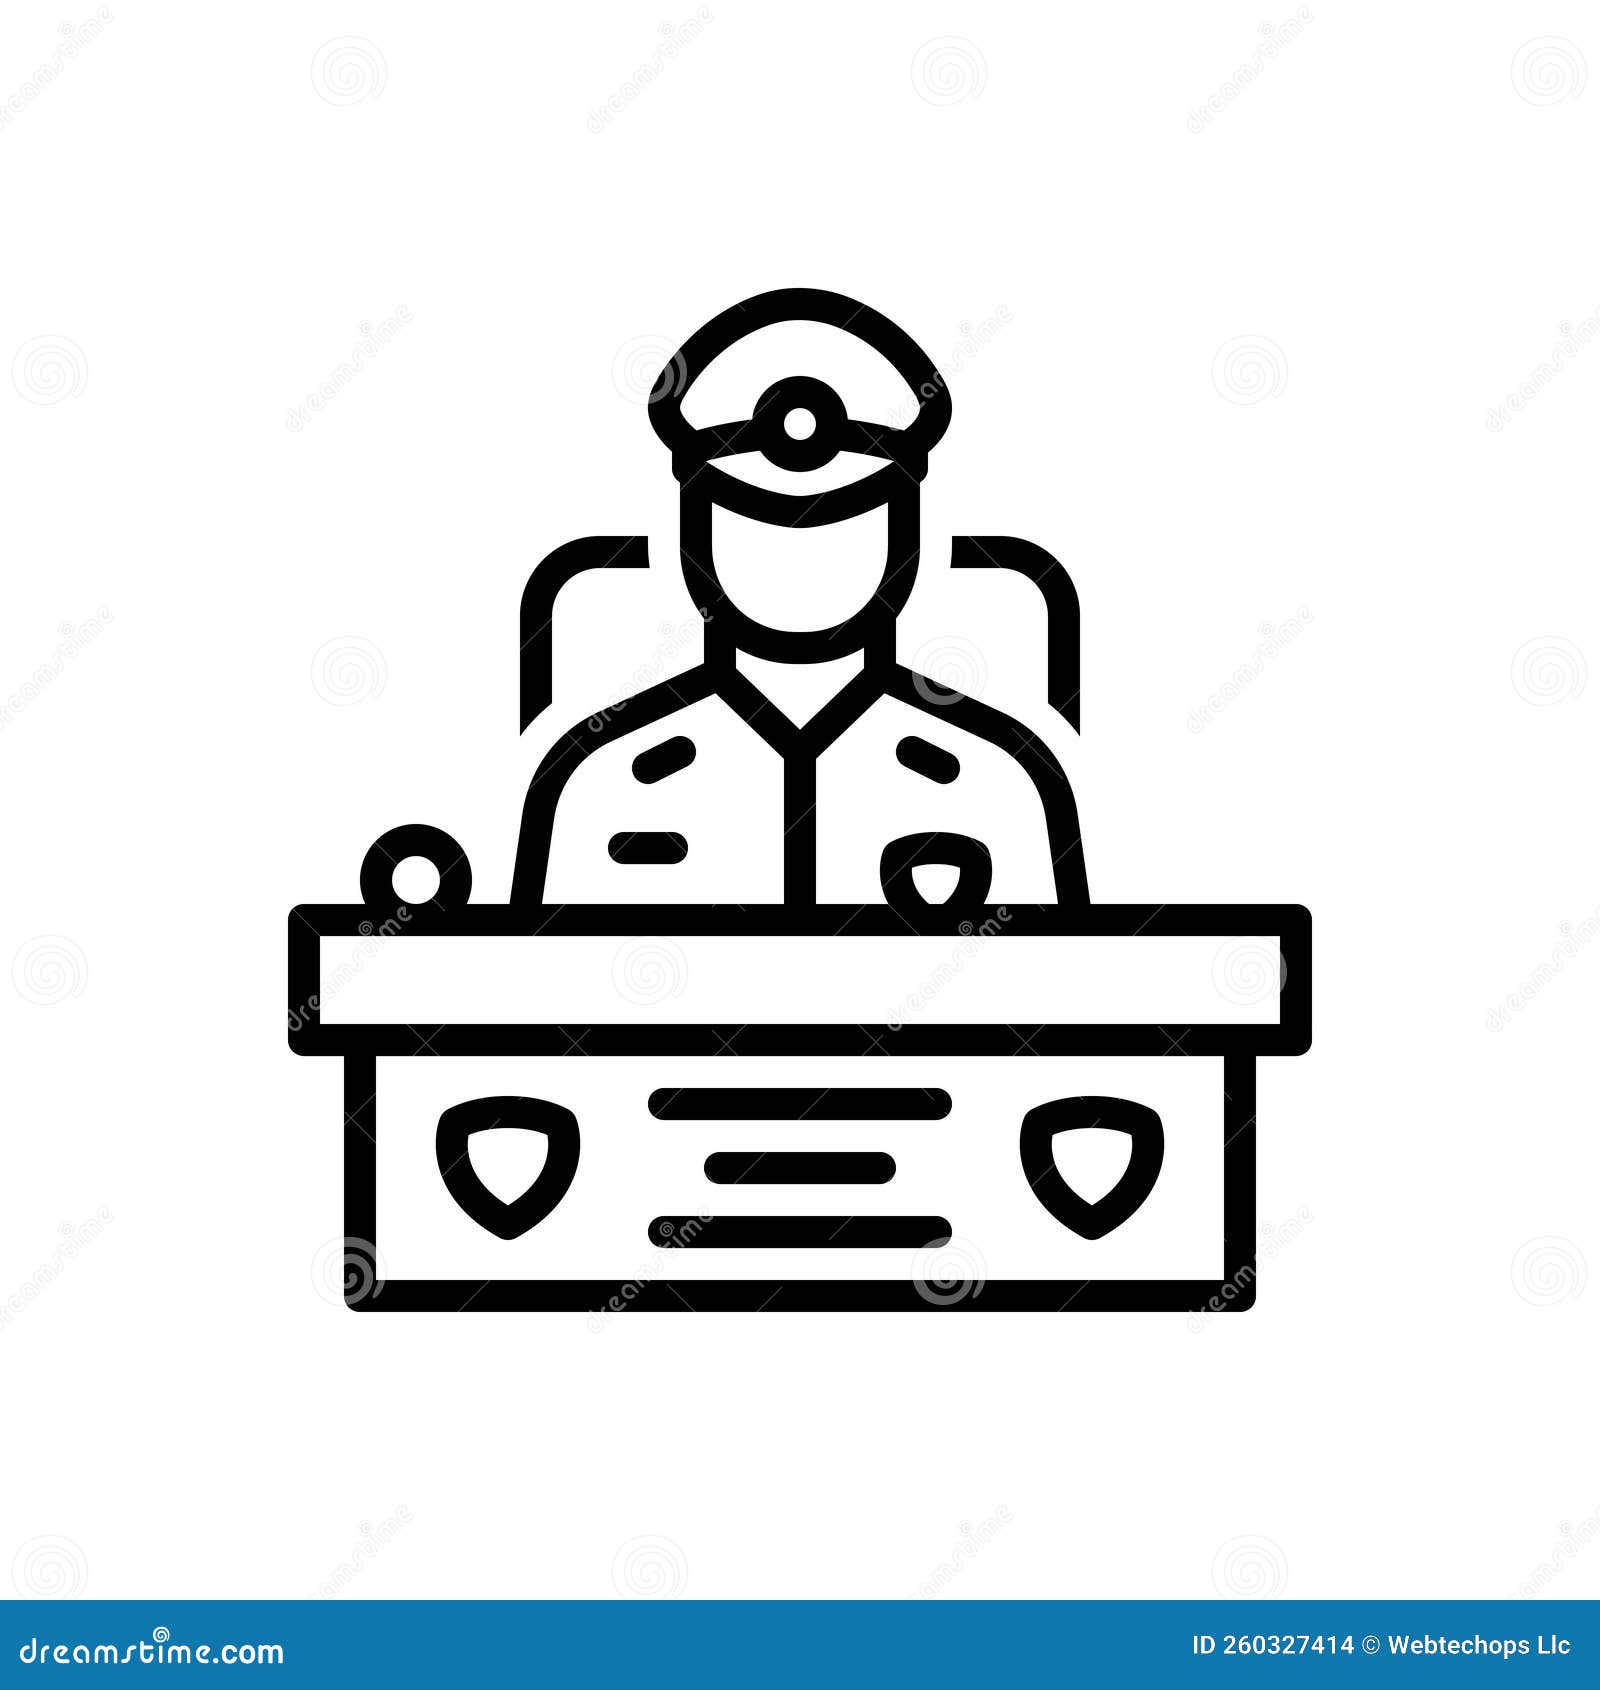 black line icon for commissioner, officer and commissary